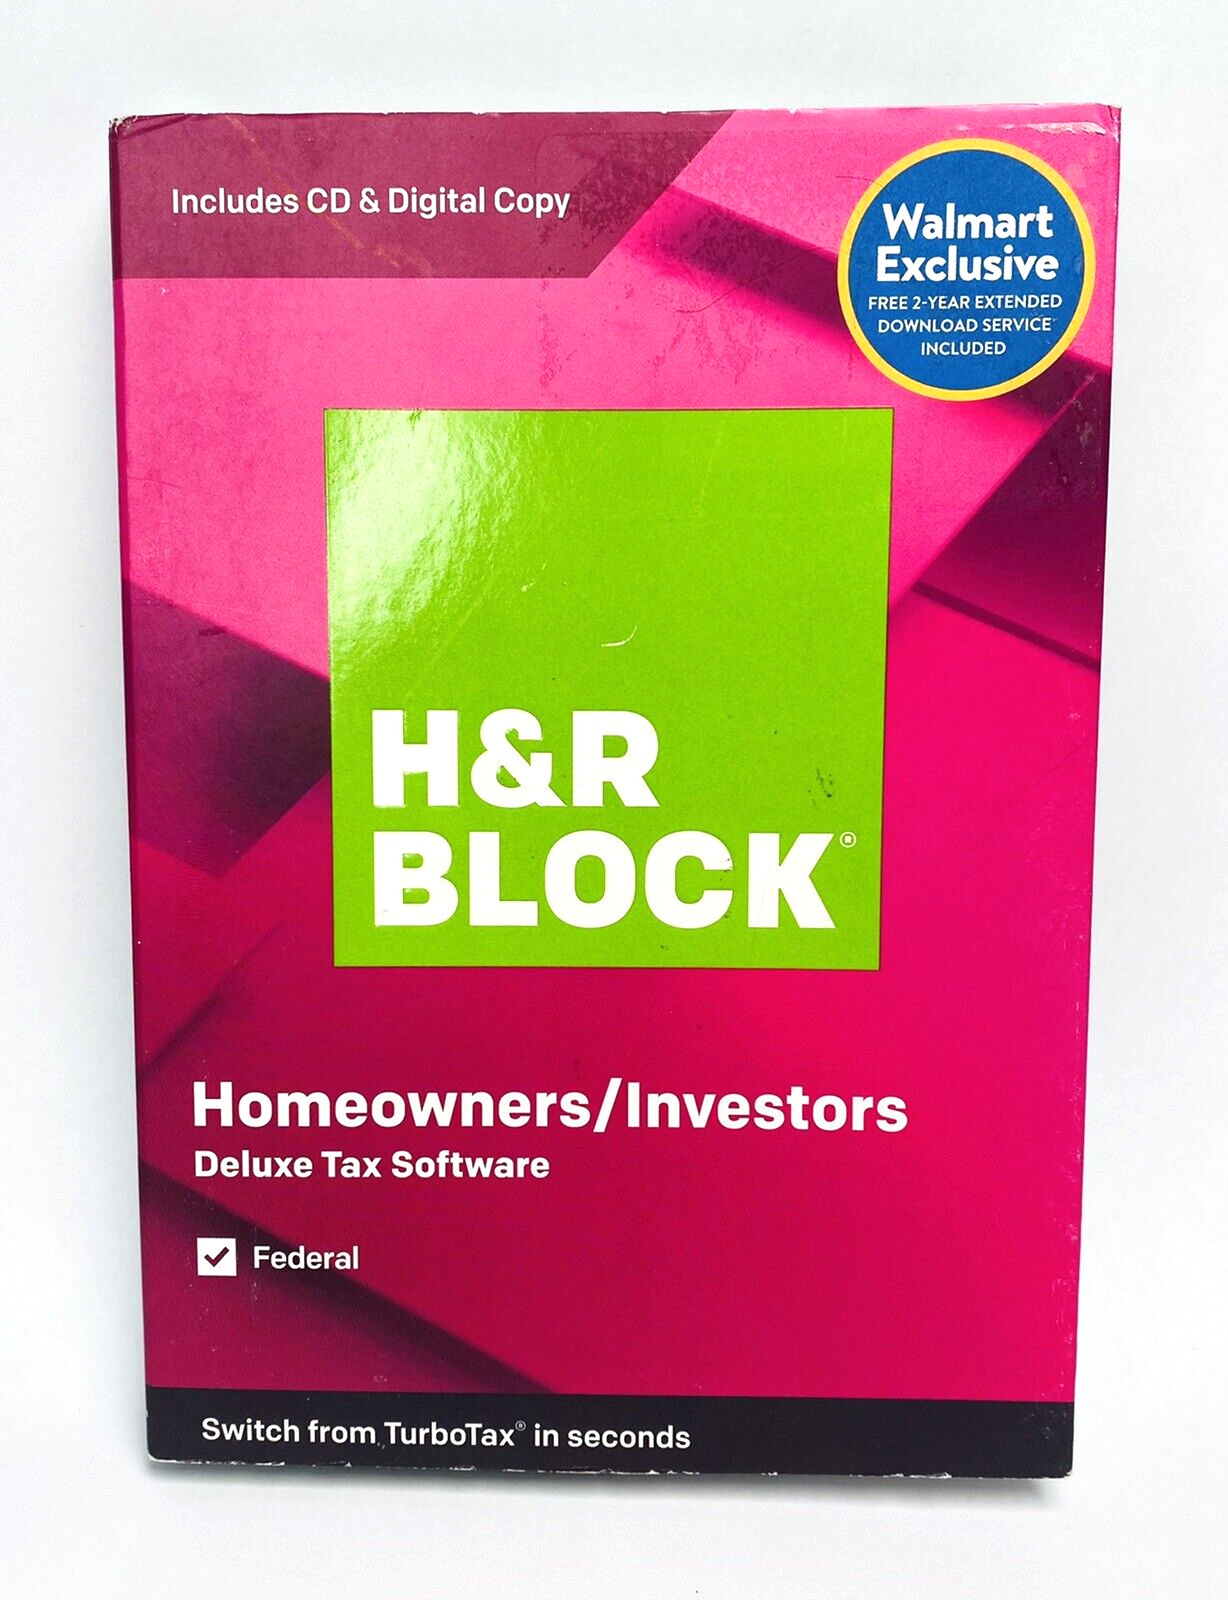 H&R BLOCK DELUXE TAX SOFTWARE 2019 HOMEOWNERS / INVESTORS